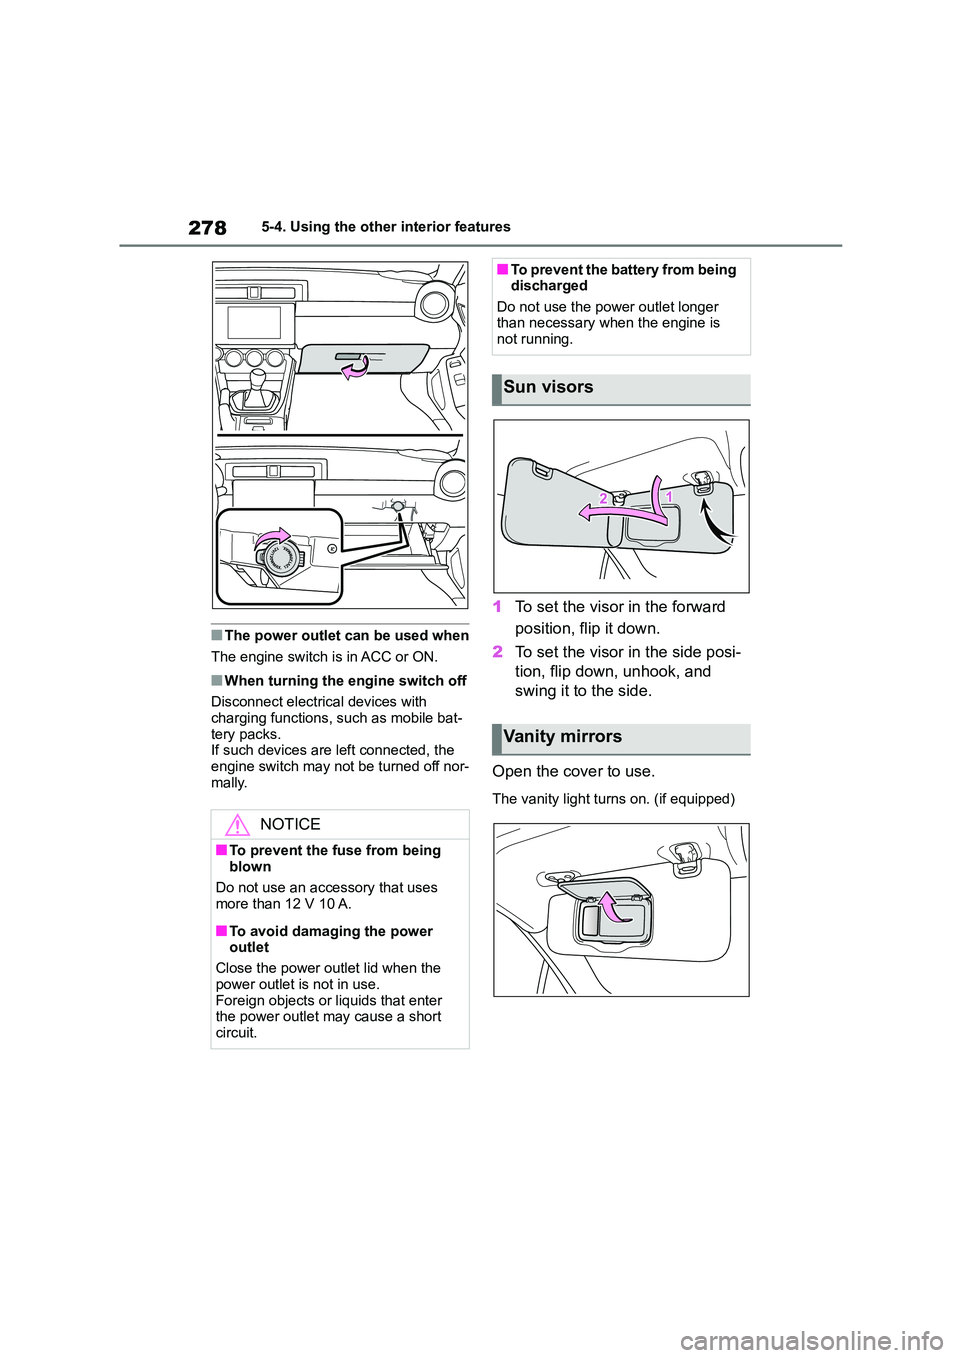 TOYOTA GR86 2022  Owners Manual (in English) 2785-4. Using the other interior features
■The power outlet can be used when 
The engine switch is in ACC or ON.
■When turning the engine switch off 
Disconnect electrical devices with  
charging 